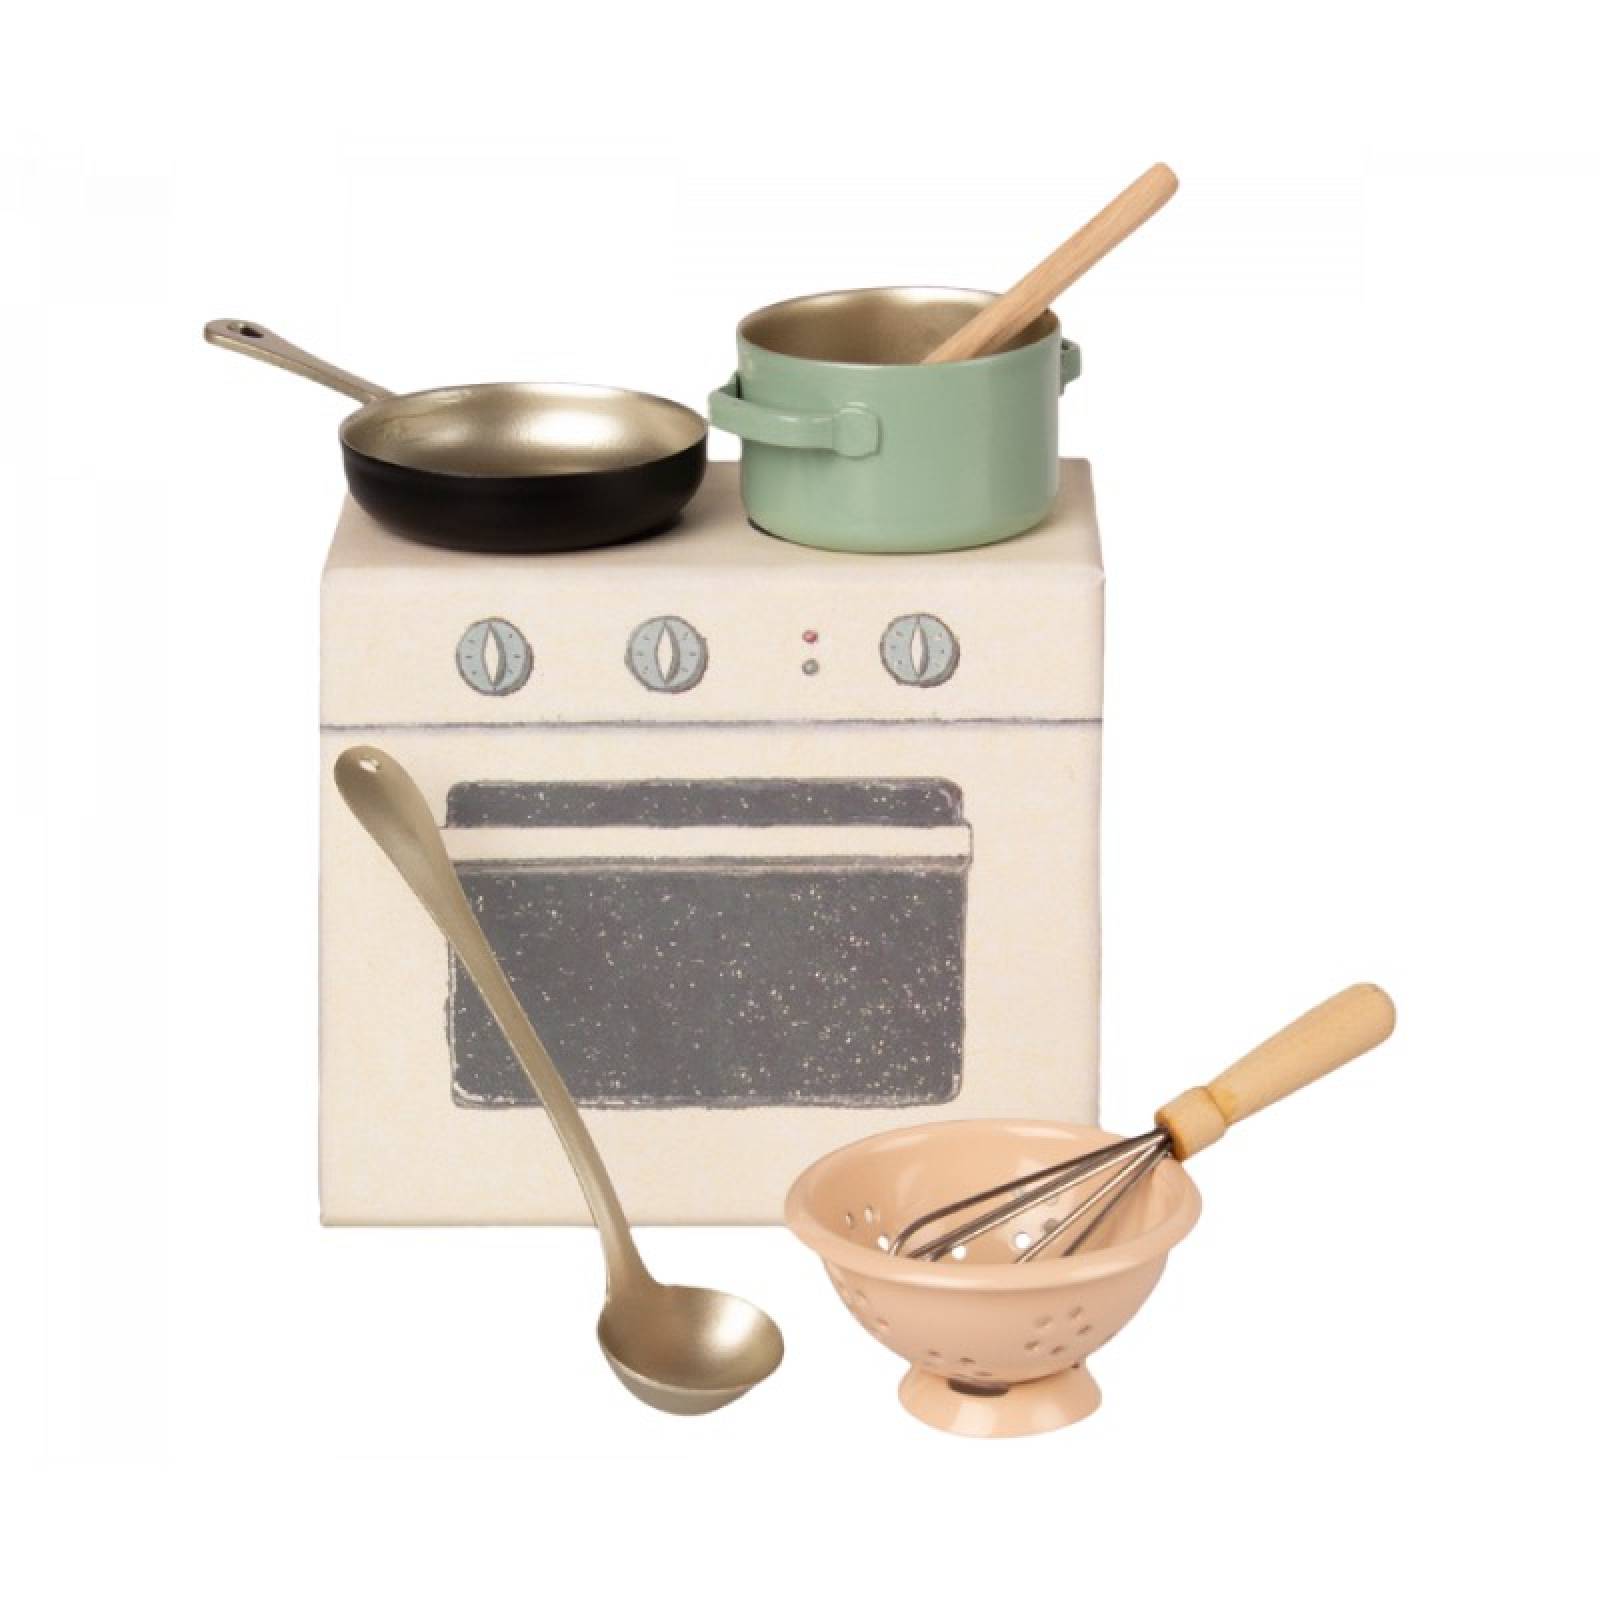 Miniature Toy Cooking Set By Maileg 3+